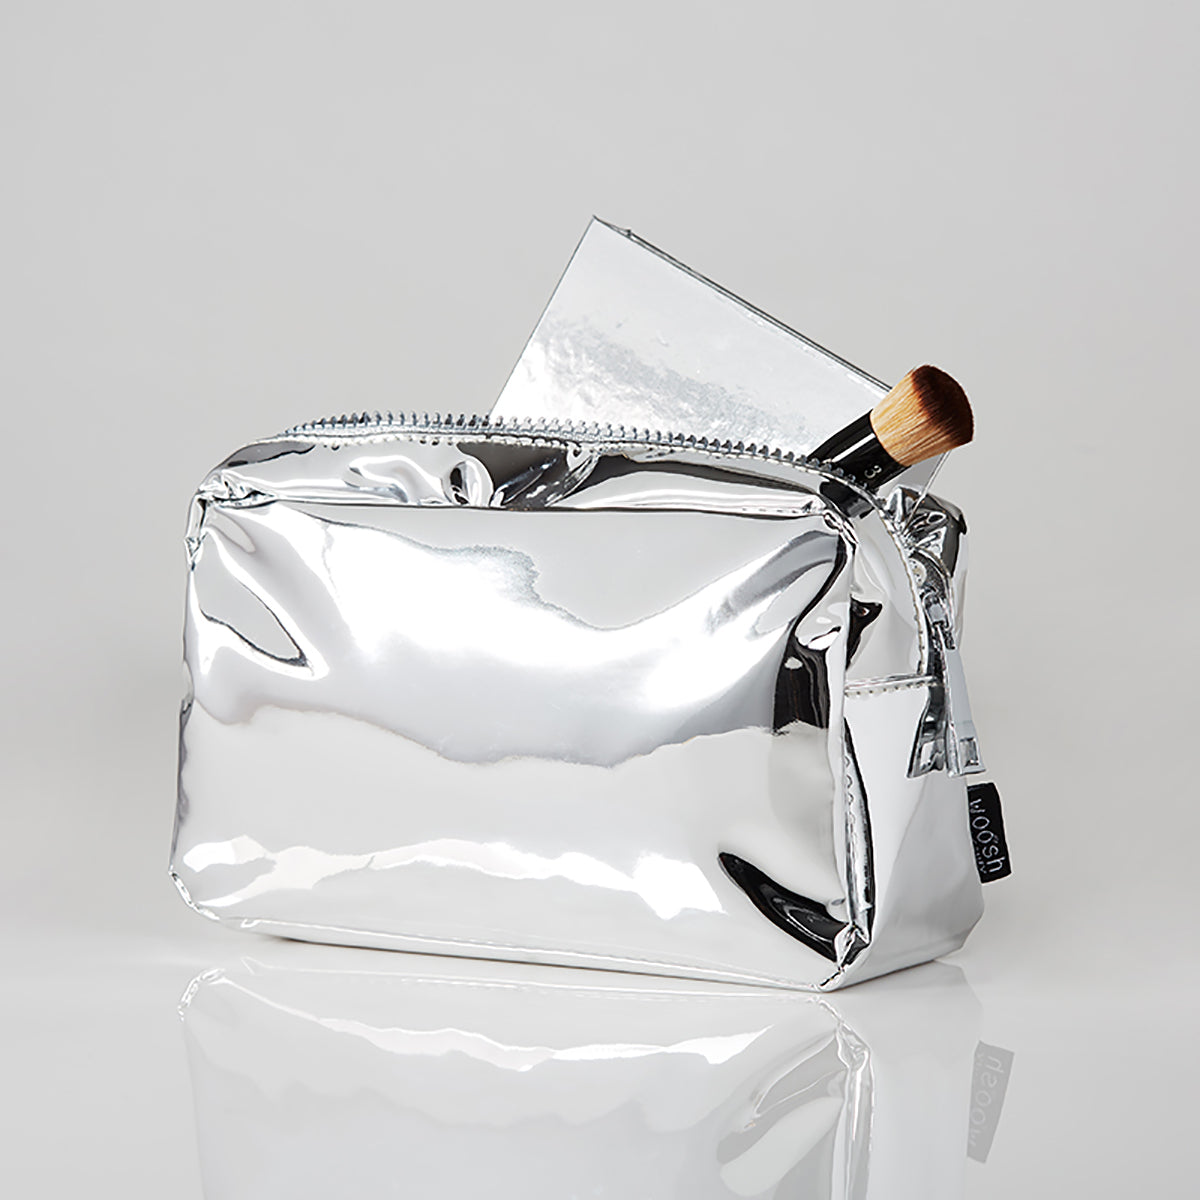 Silver Cosmetics Bag - Clean Skincare - Cruelty Free Makeup - Paraben Free - Purlisse